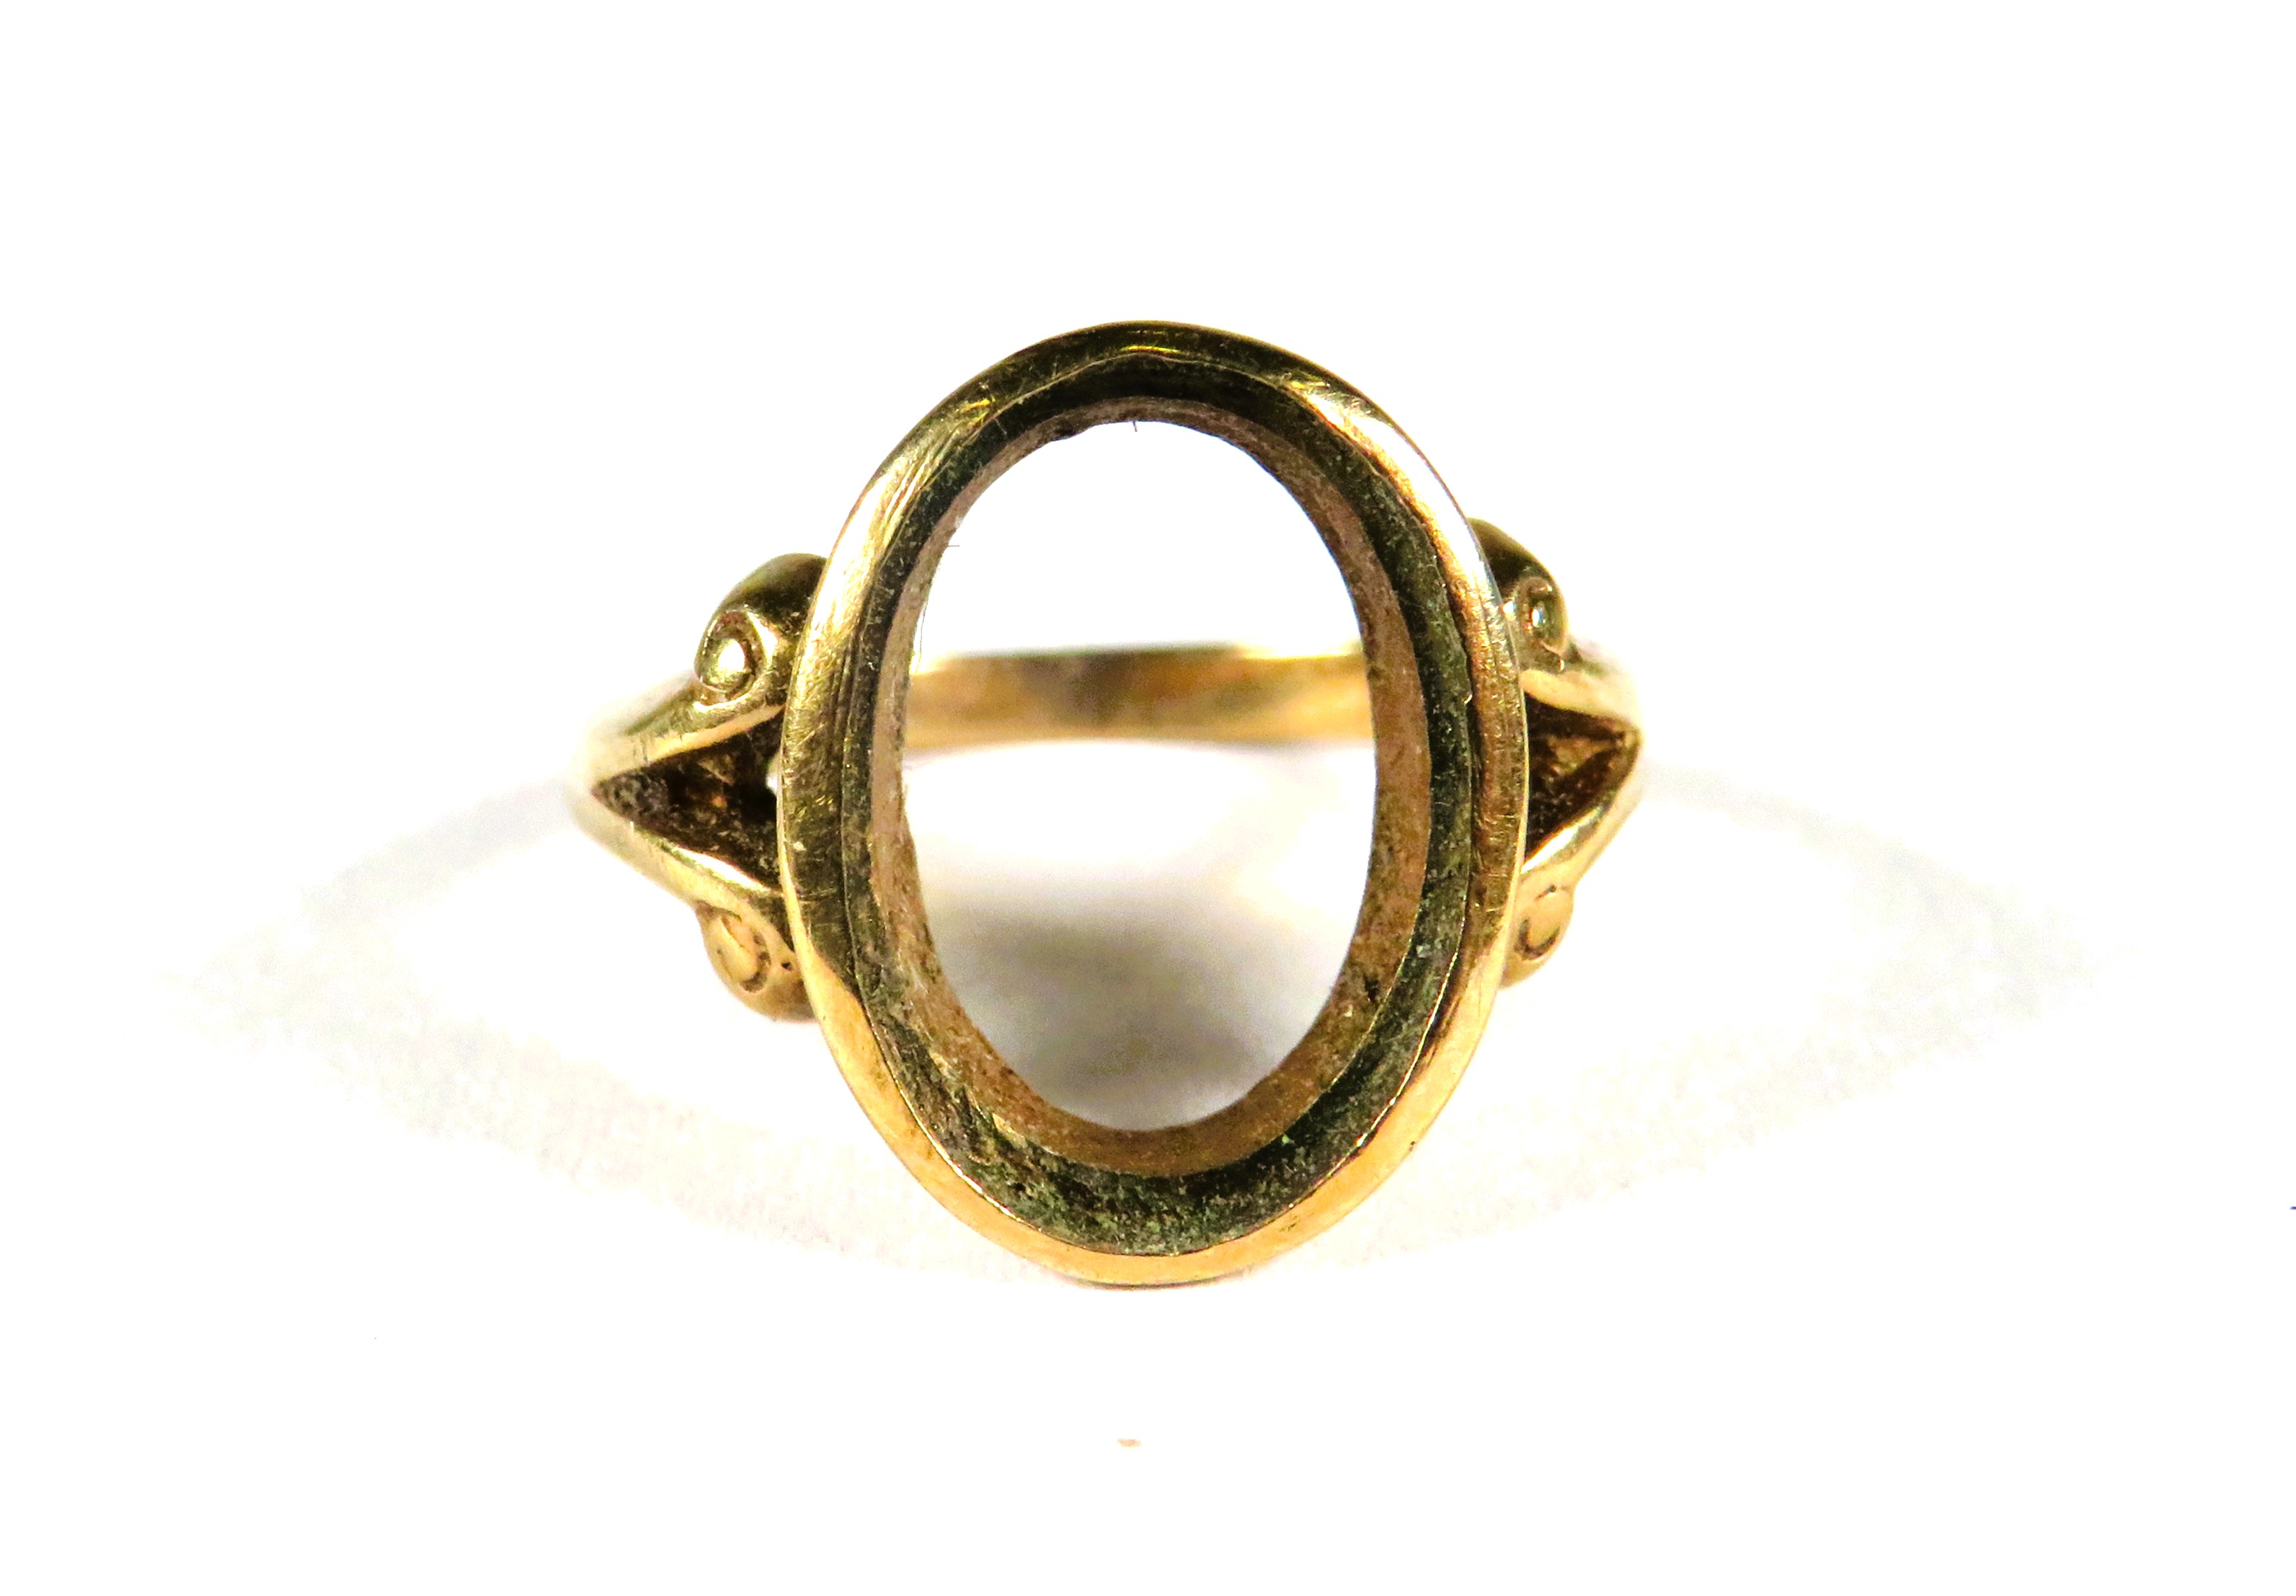 9ct Yellow Gold ring with Vacant mount, suitable for jeweller or project. Finger size 'N-5'  3.5g - Image 3 of 3